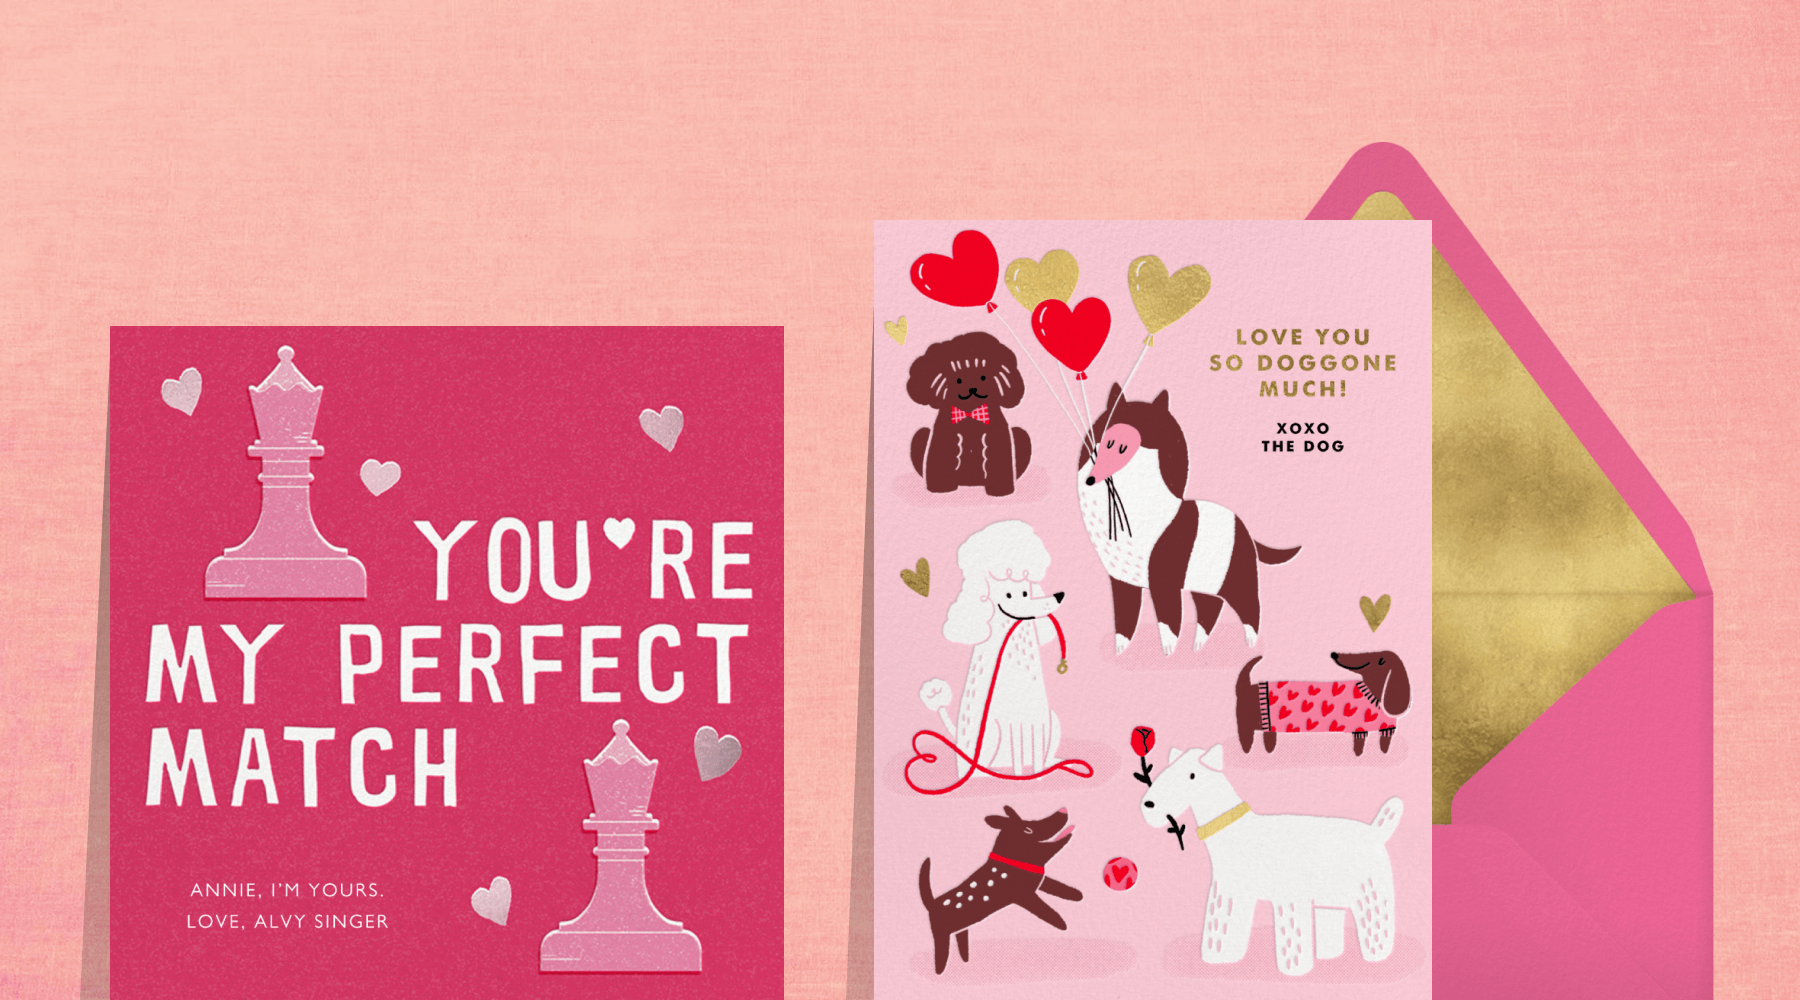 A pink card says ‘you’re my perfect match’ with two chess pieces; a pink card has several dogs with heart balloons.